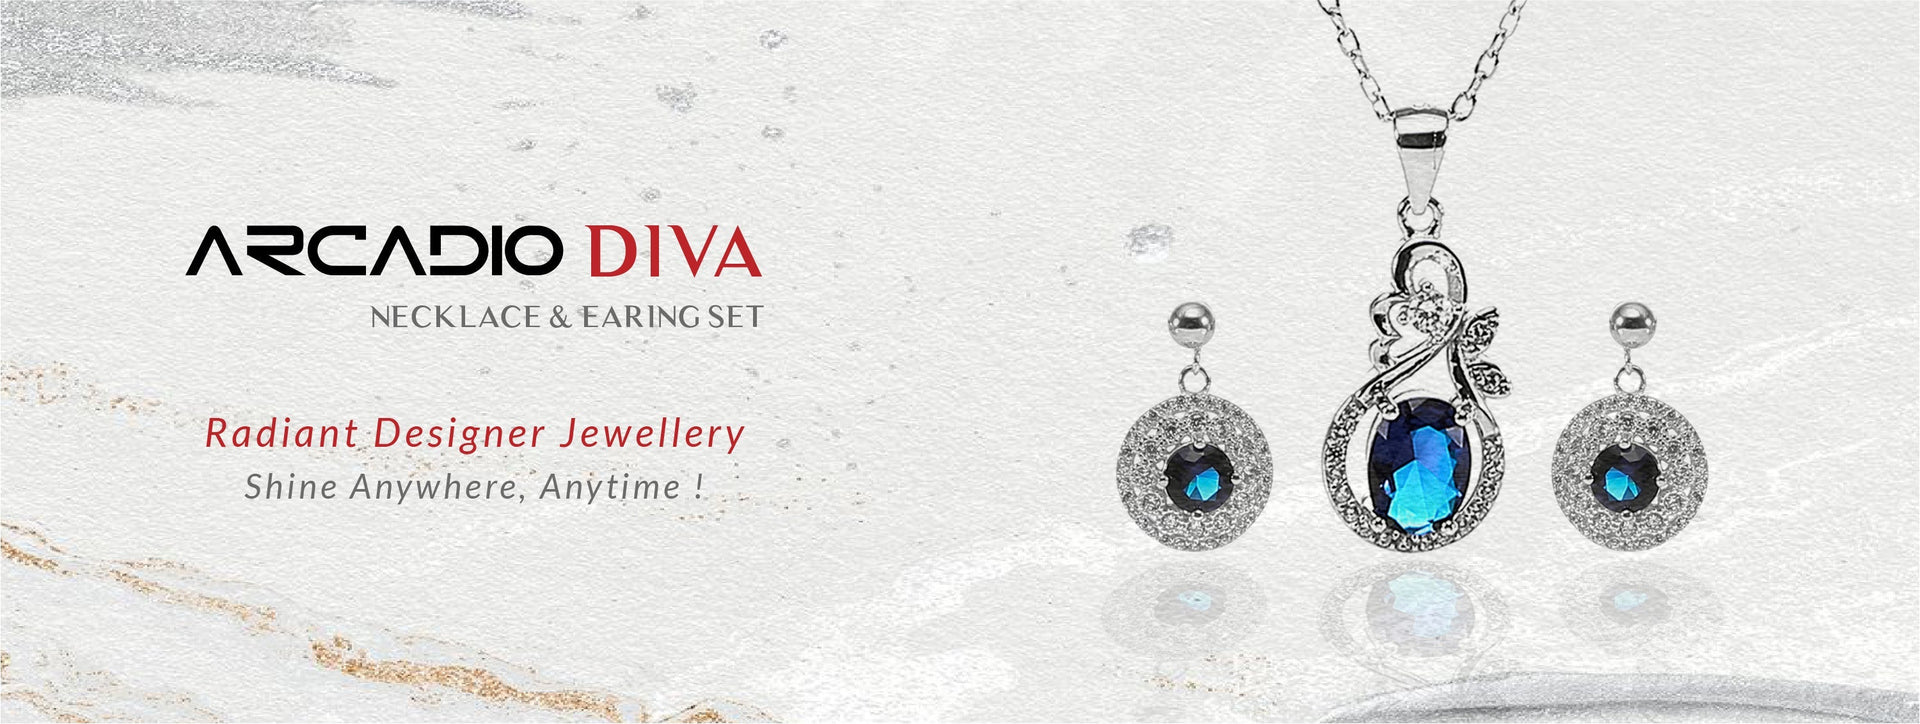 DIVA Necklace and Earring Set ARCADIO